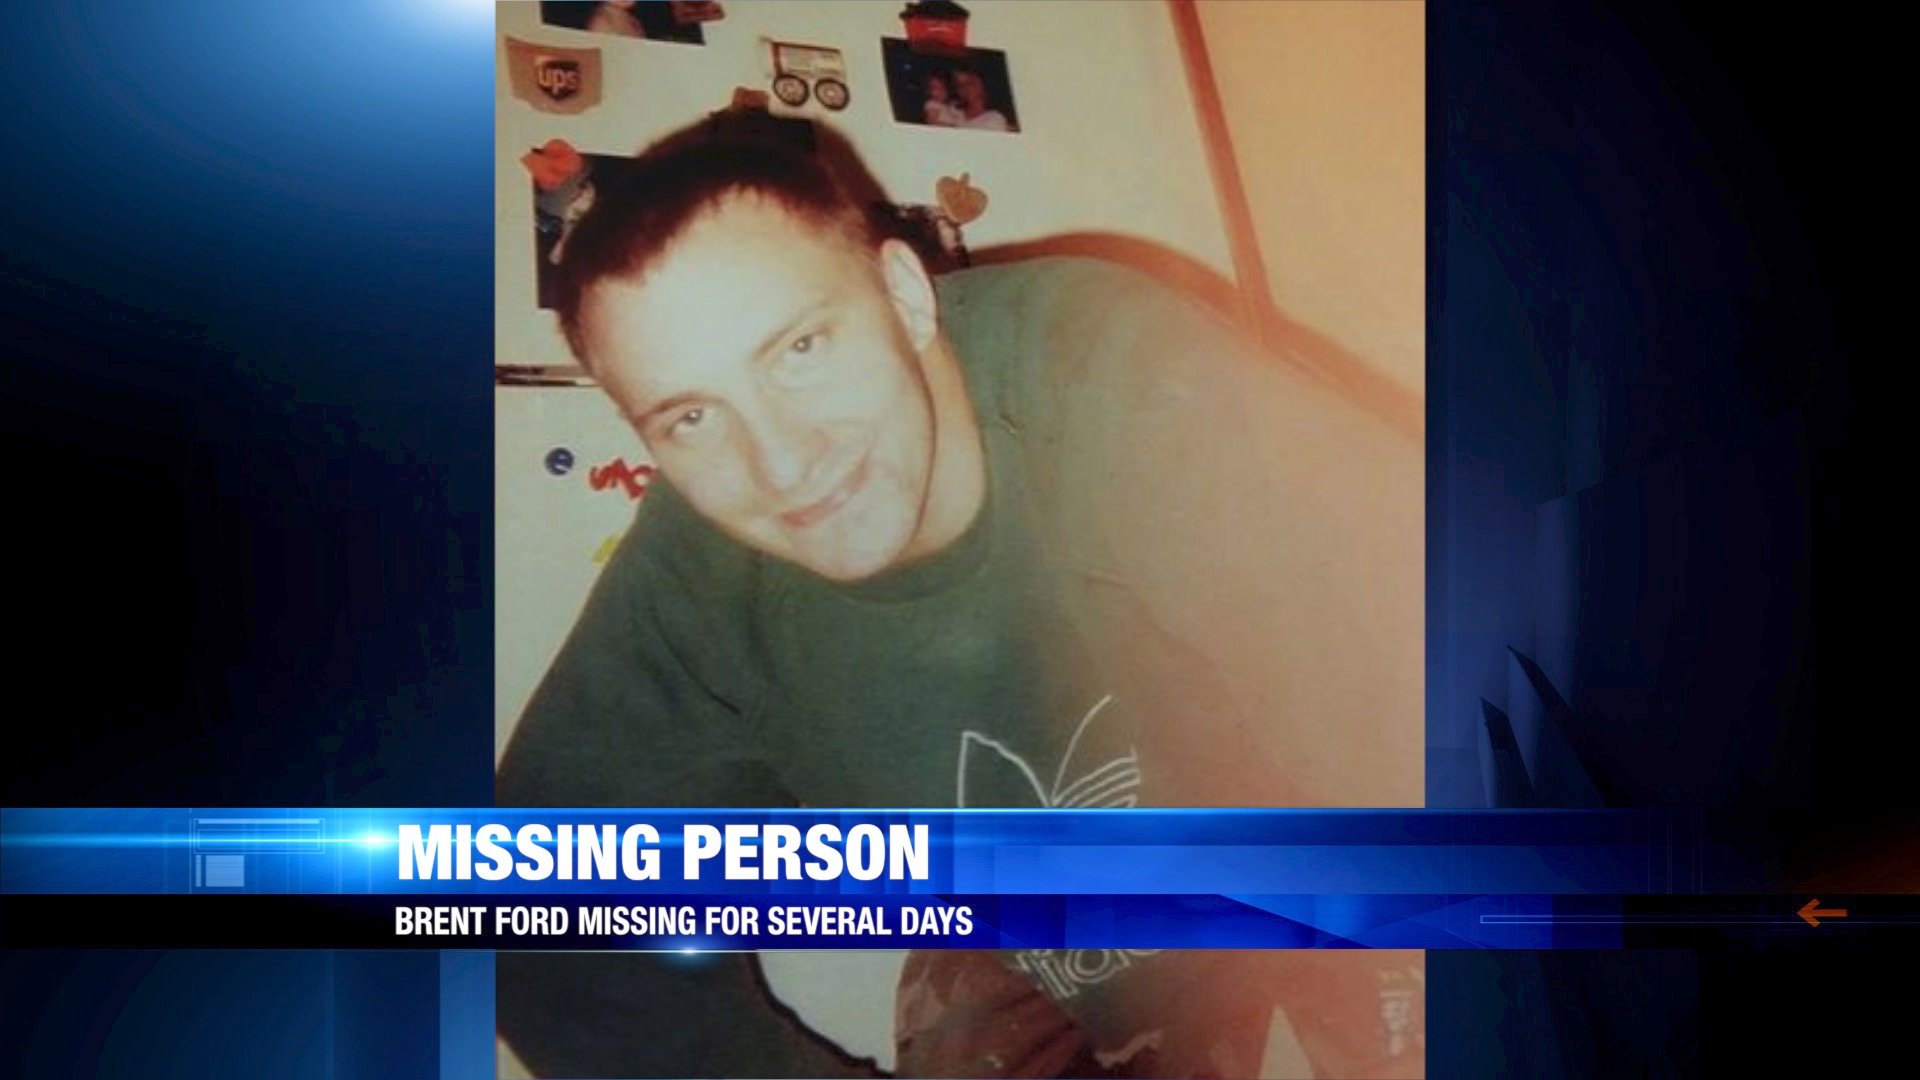 Columbus Man Missing for 2 Weeks from Local Motel - WLTZ